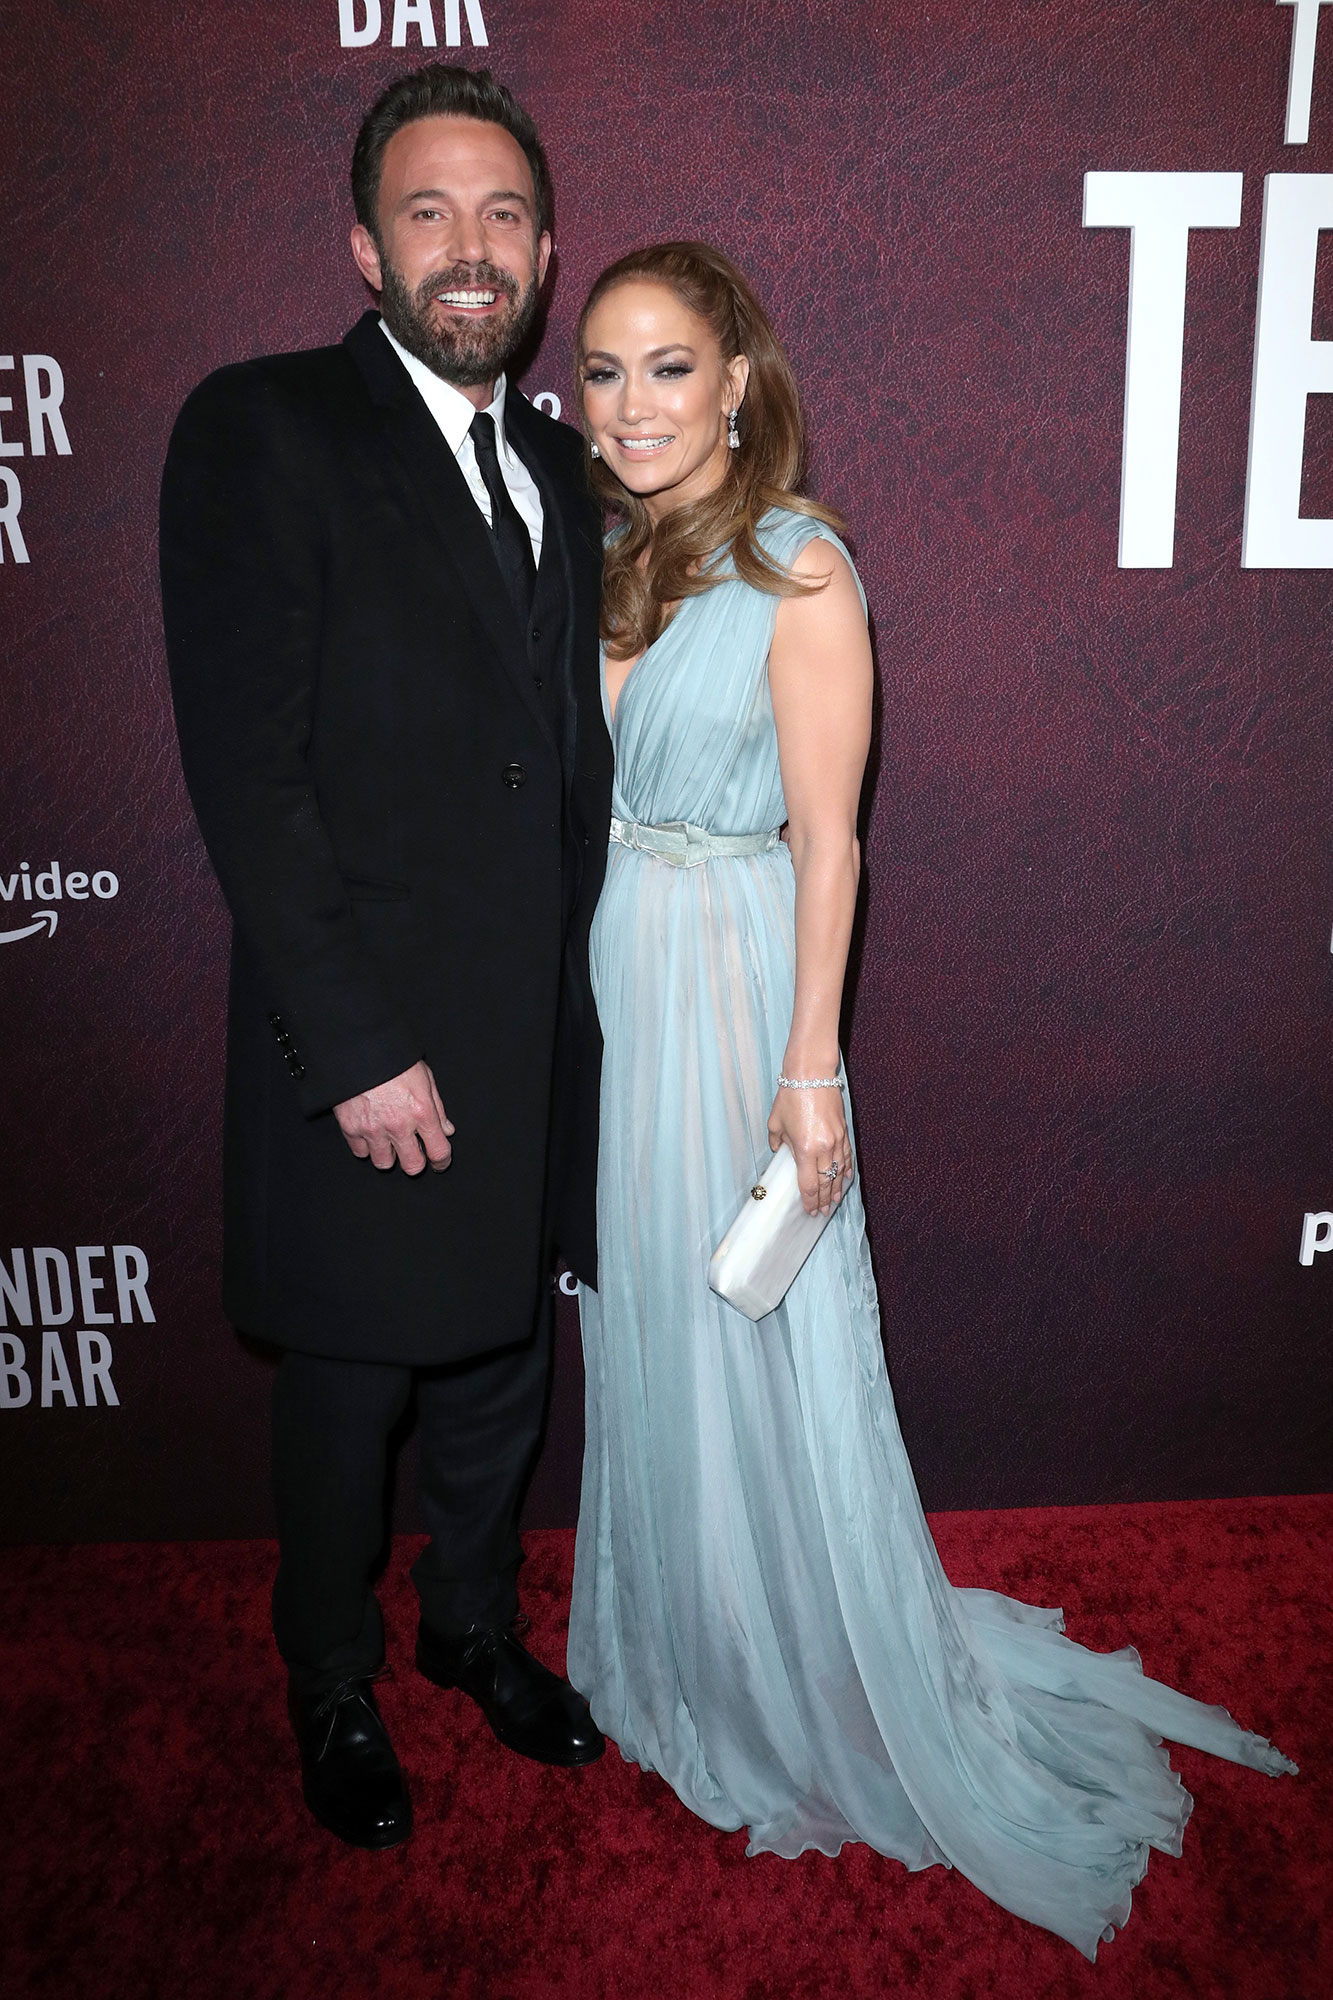 Jennifer Lopez Reveals Plans to Grow Old With Ben Affleck